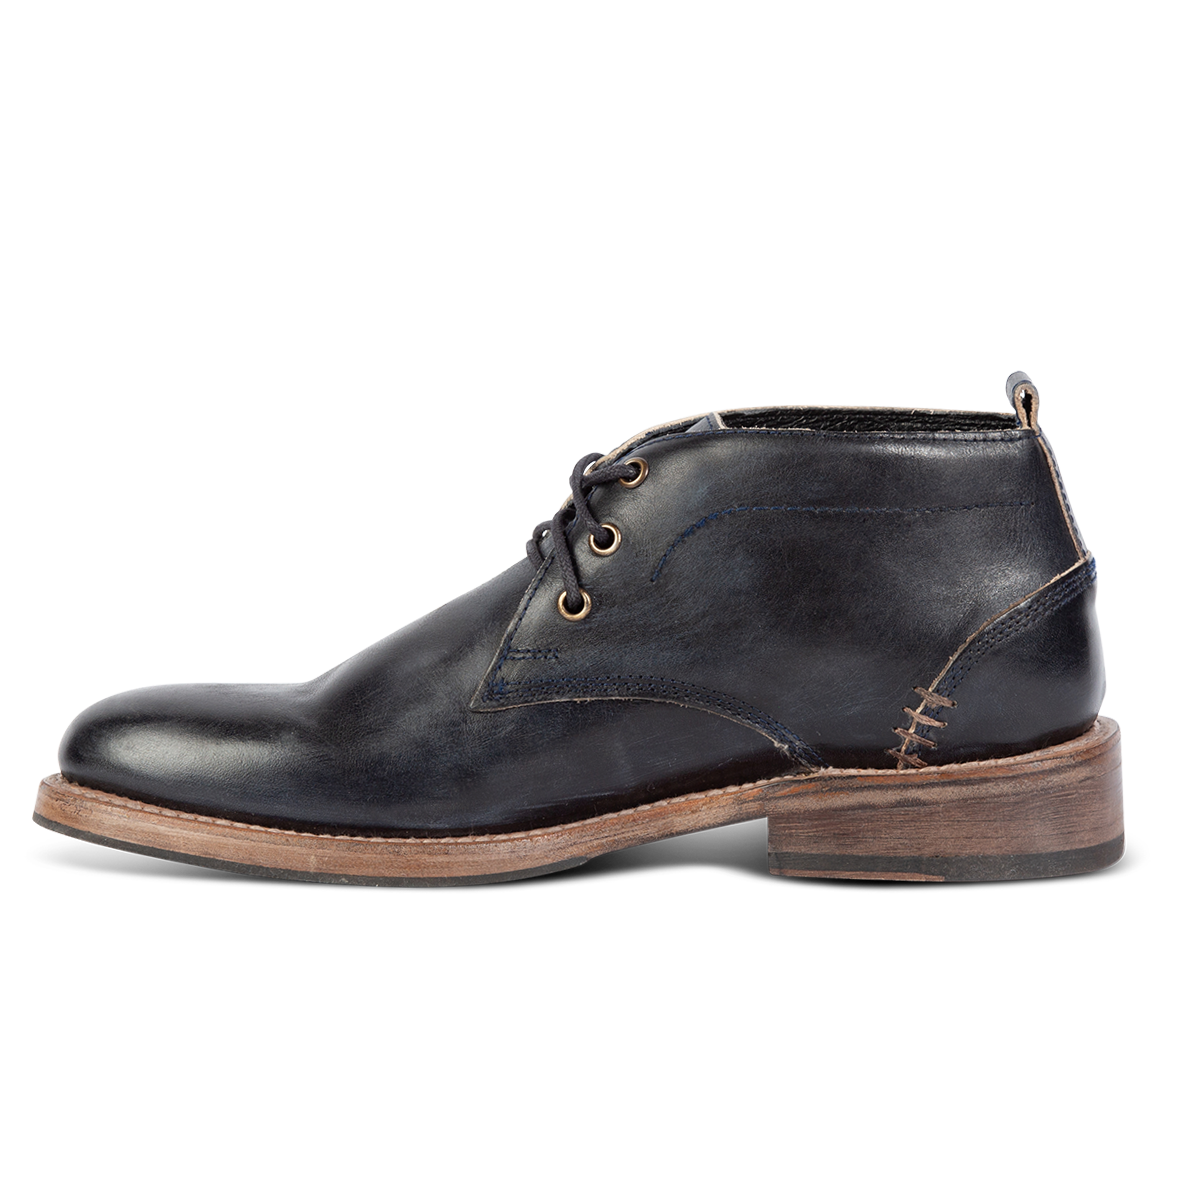 Inside view showing stitch detailing and brass lace hardware on FREEBIRD men's McCoy navy shoe